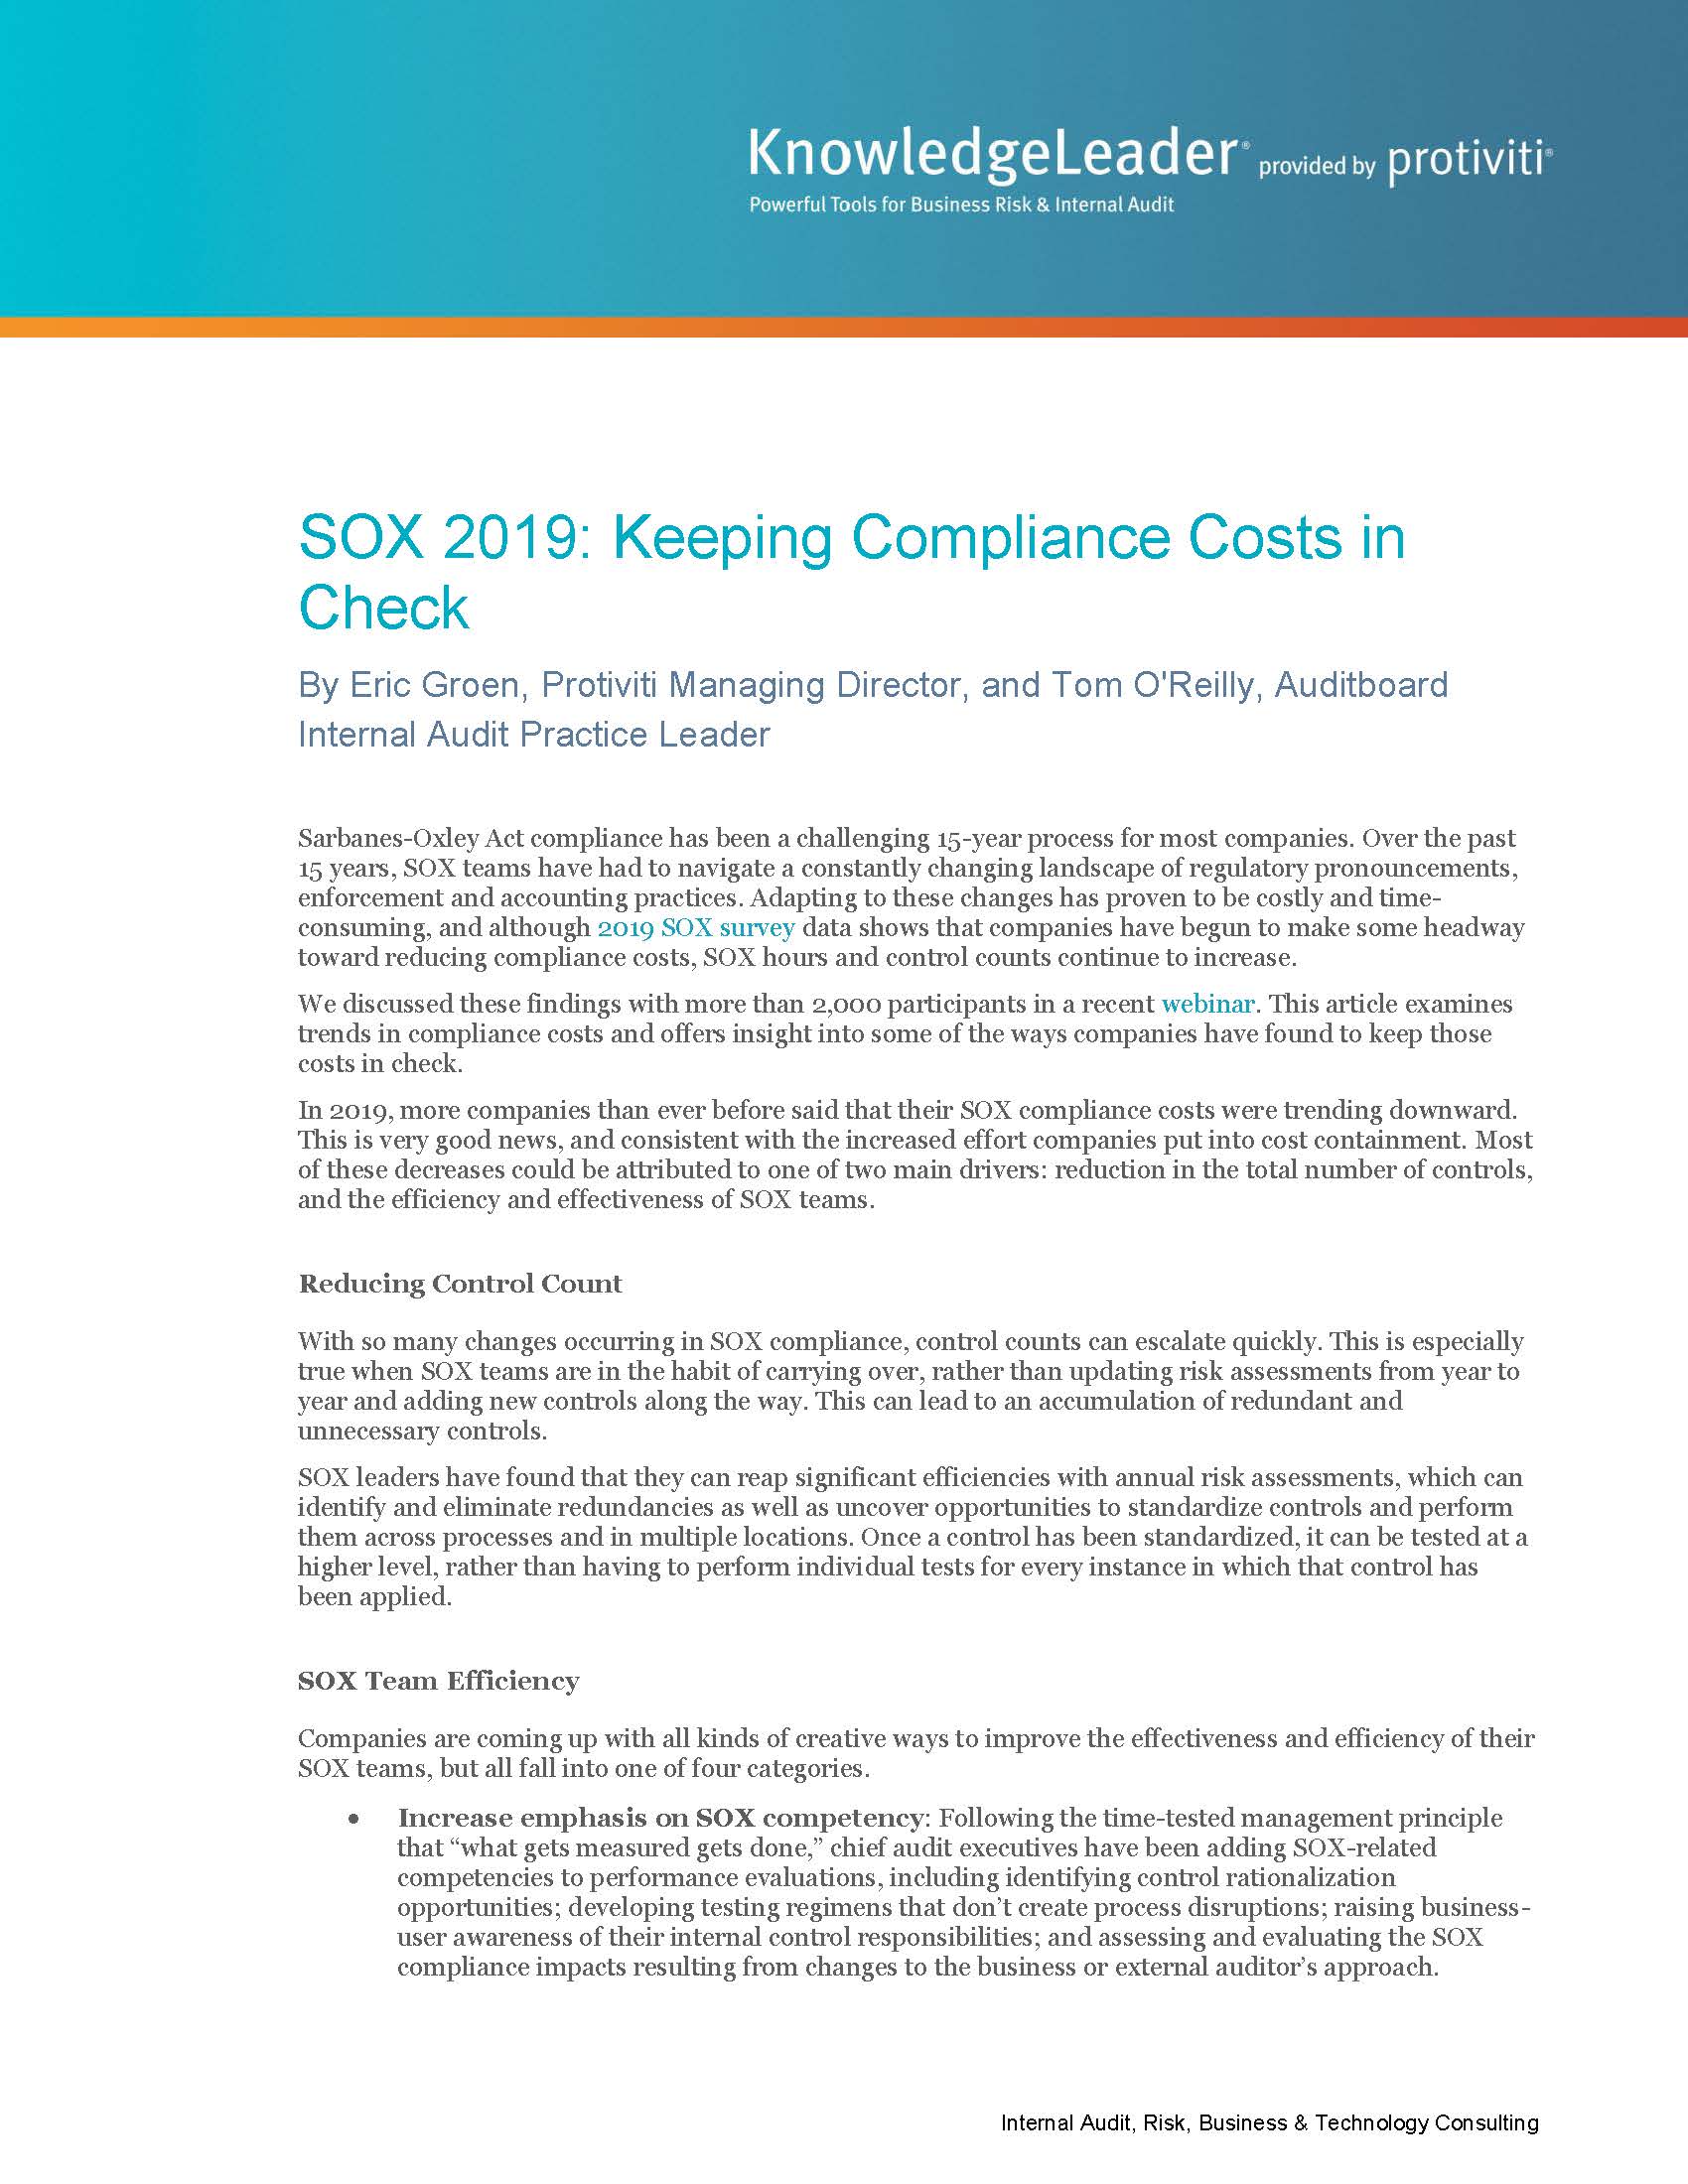 Screenshot of the first page of SOX 2019 Keeping Compliance Costs in Check